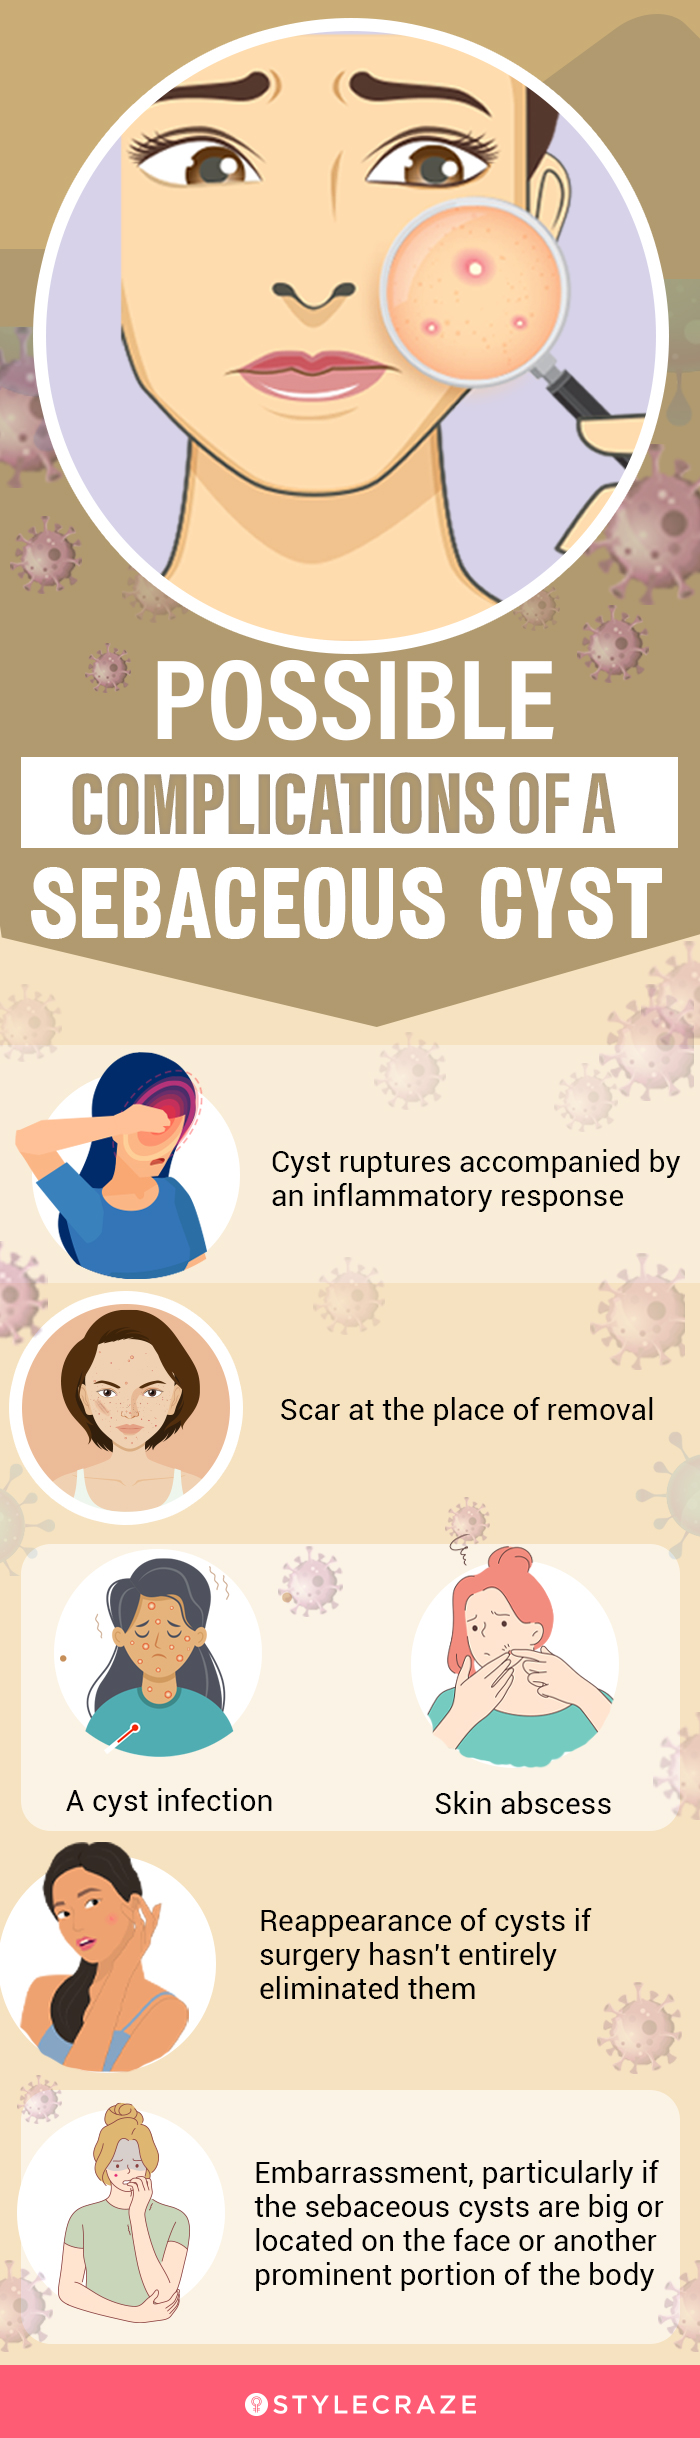 possible complications of a sebaceous cyst [infographic]